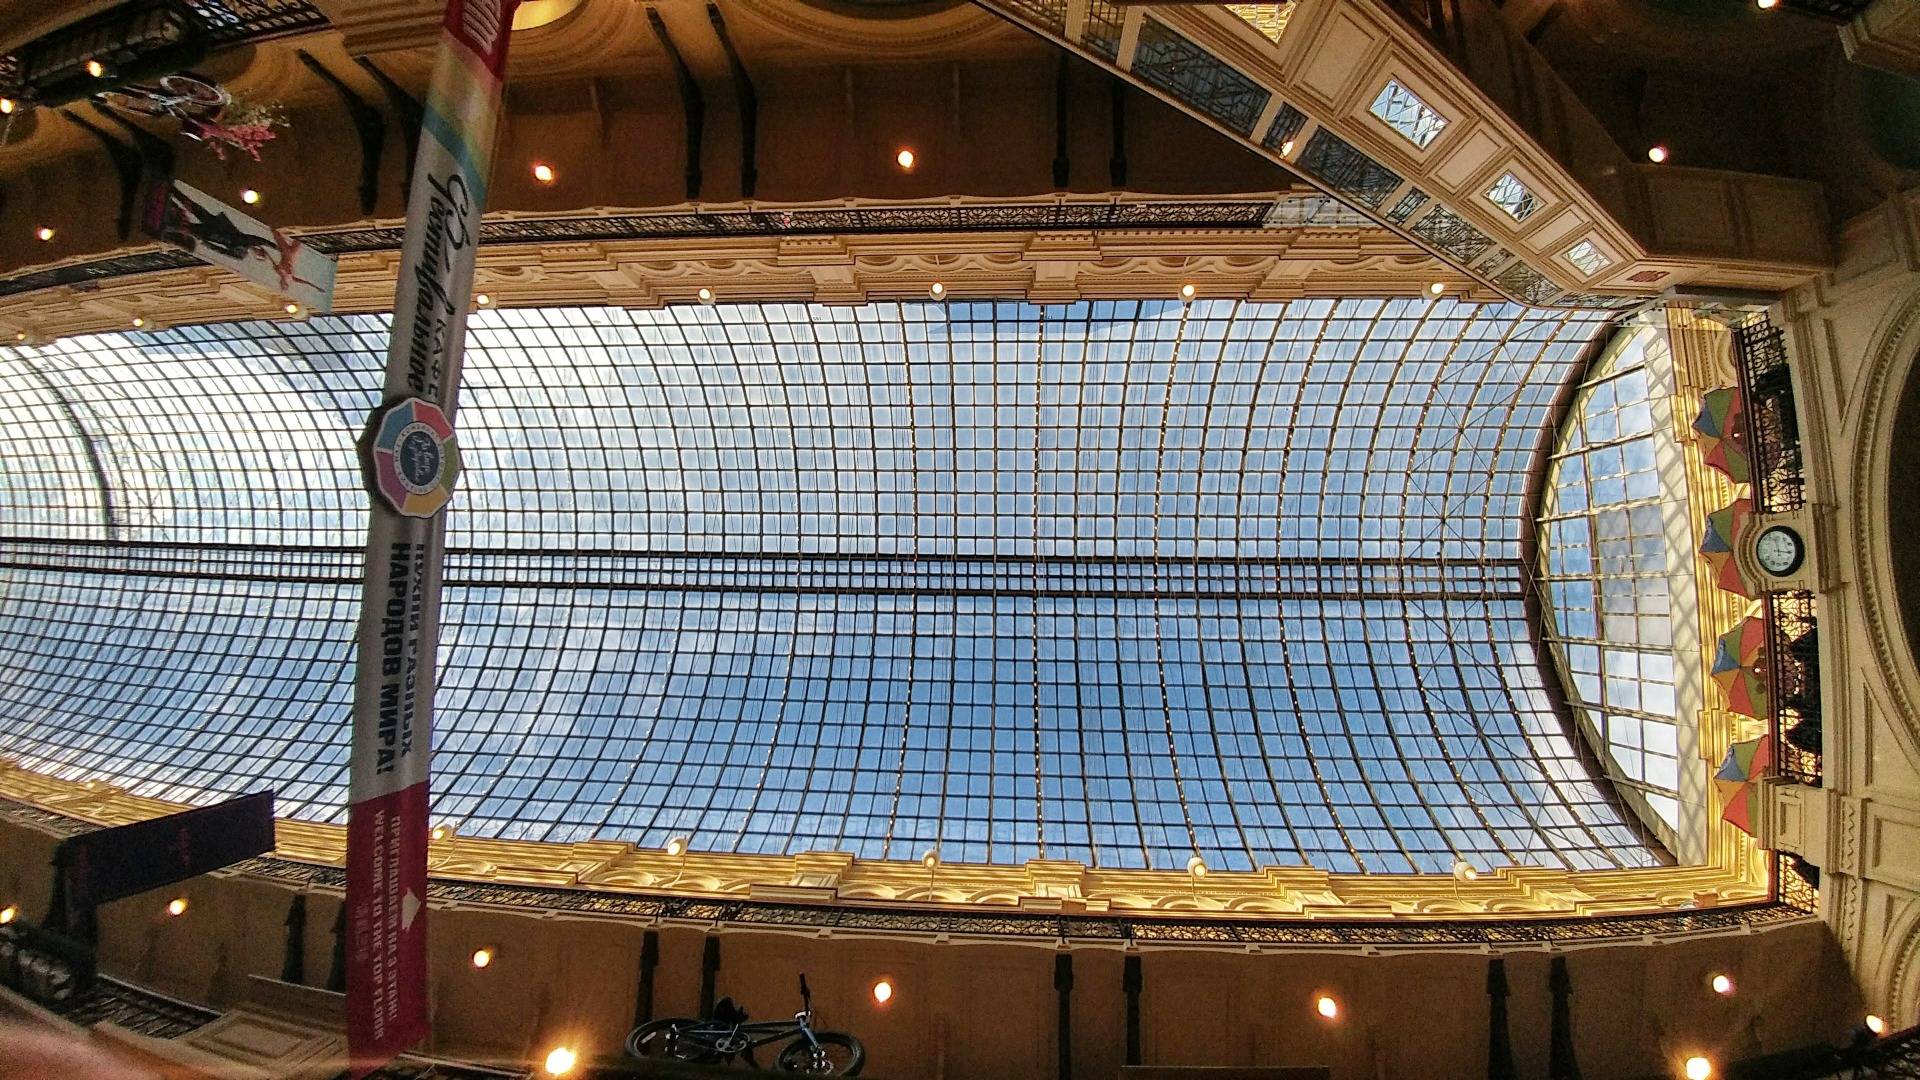 The glass roof